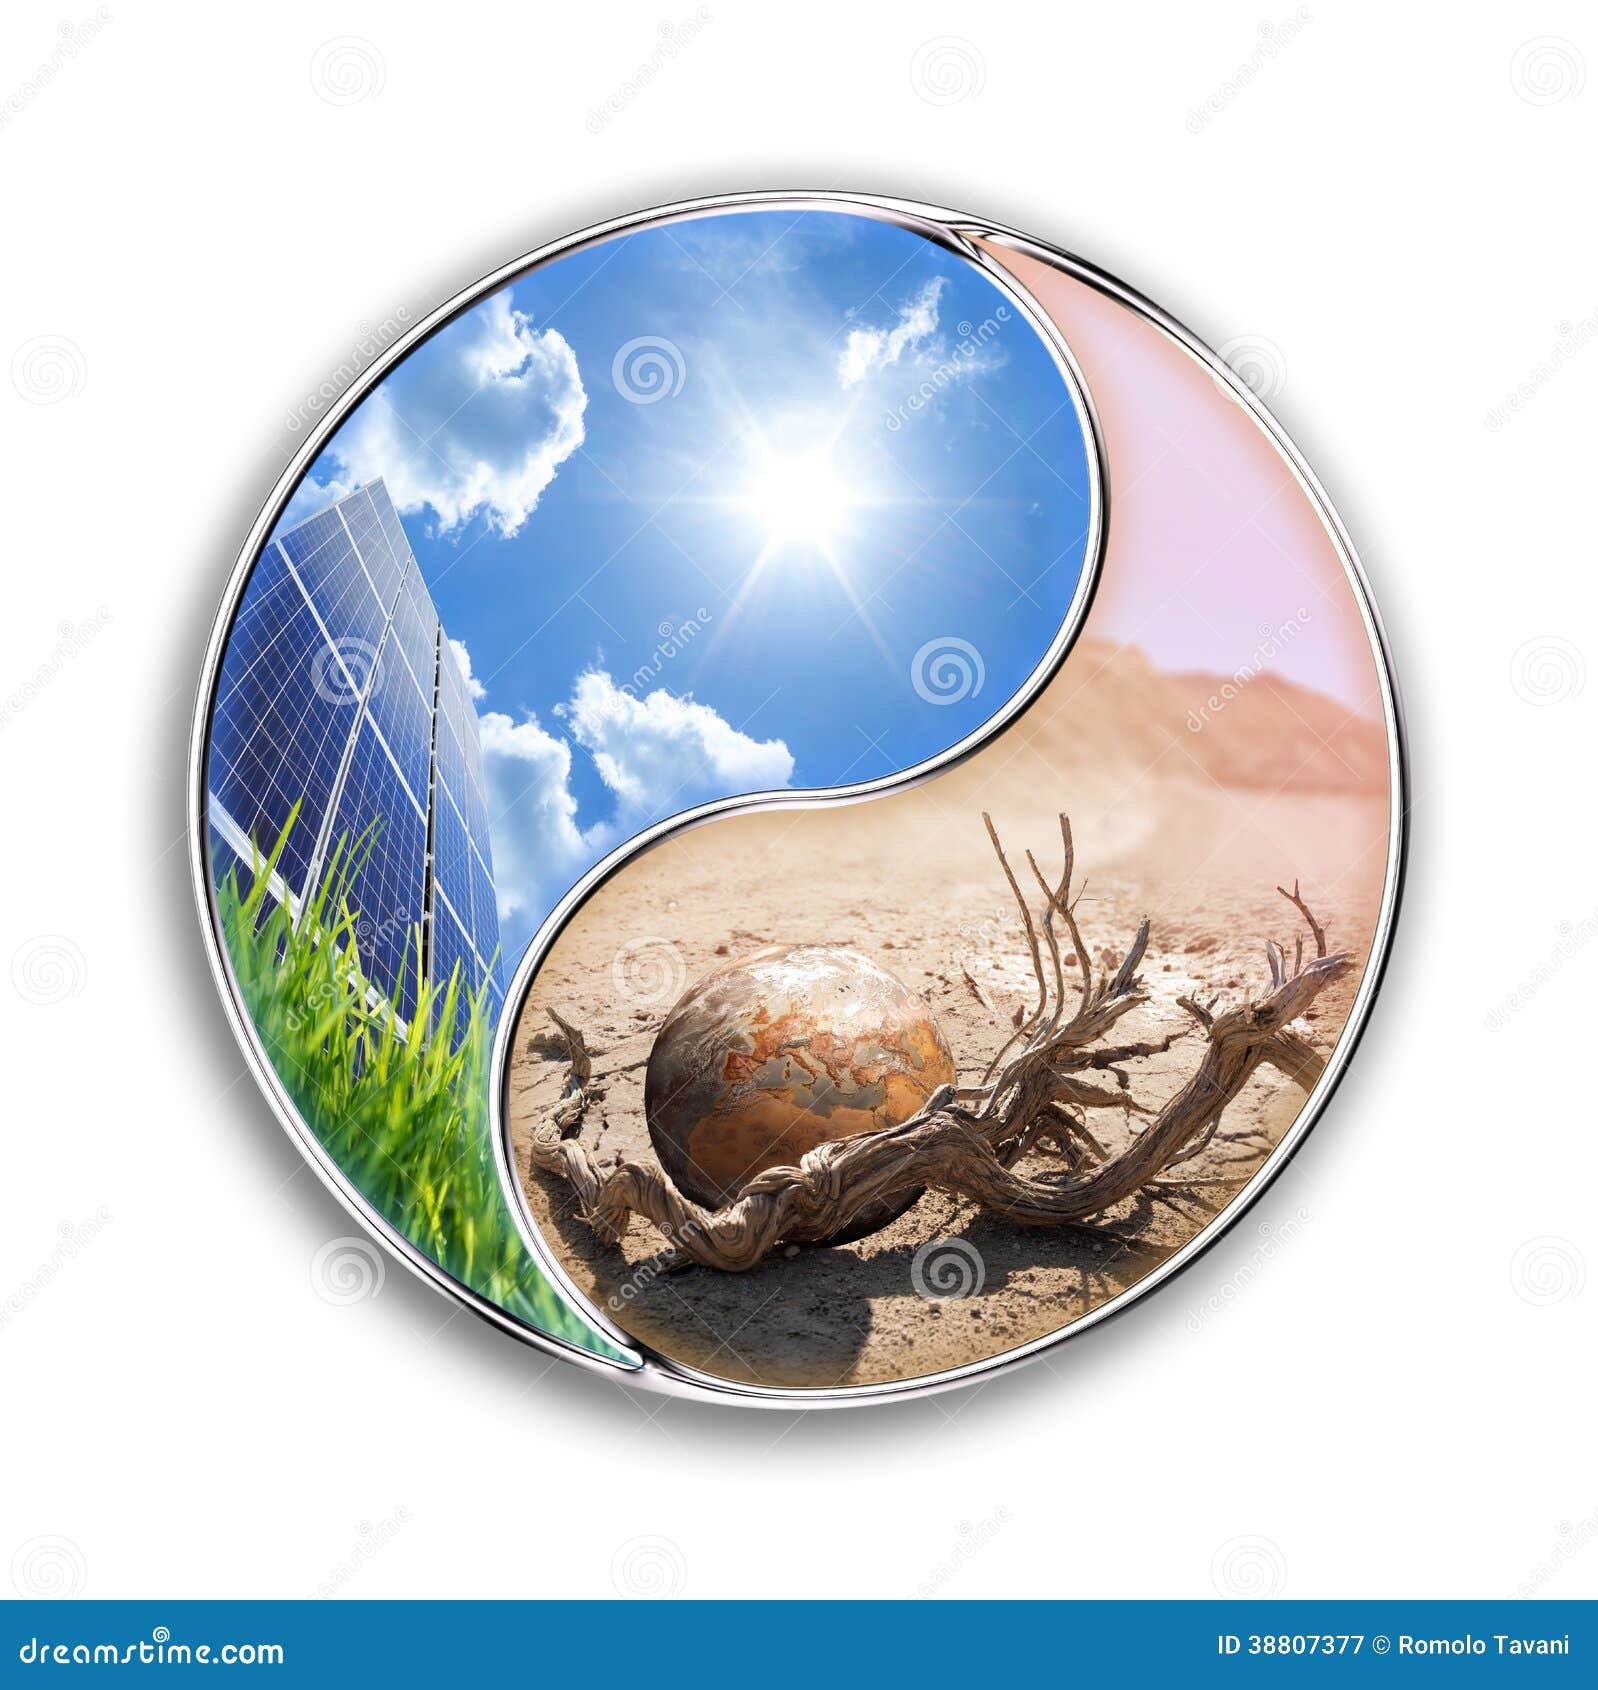 energy solar can save our planet